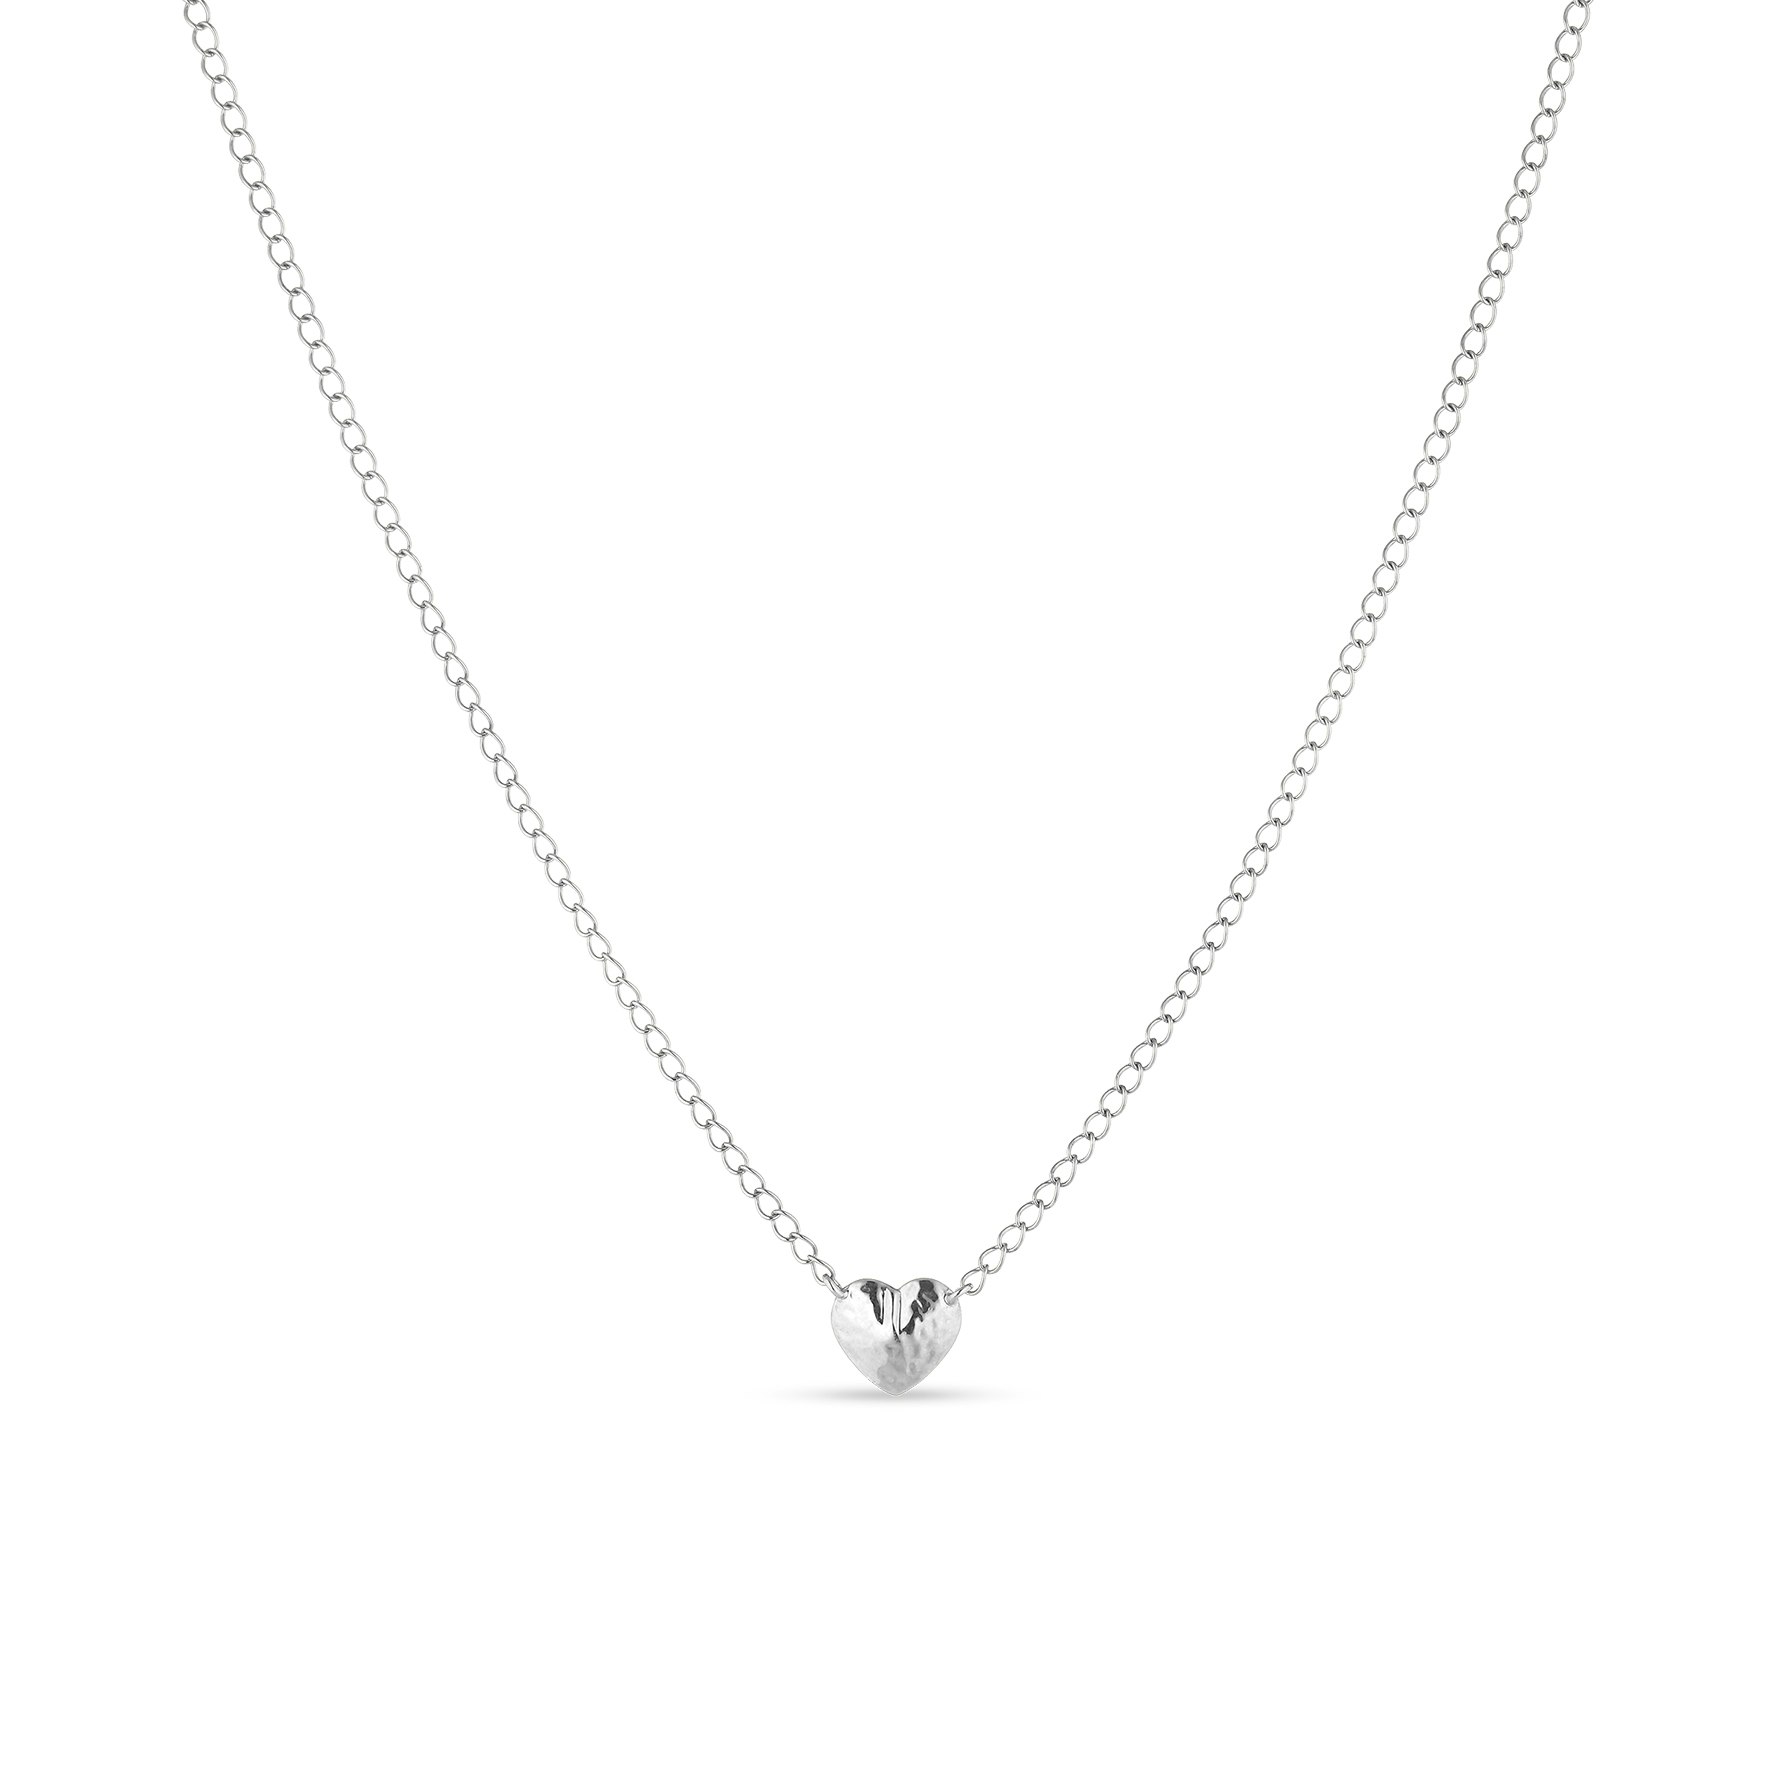 Bruised Heart Necklace from Jane Kønig in Silver Sterling 925